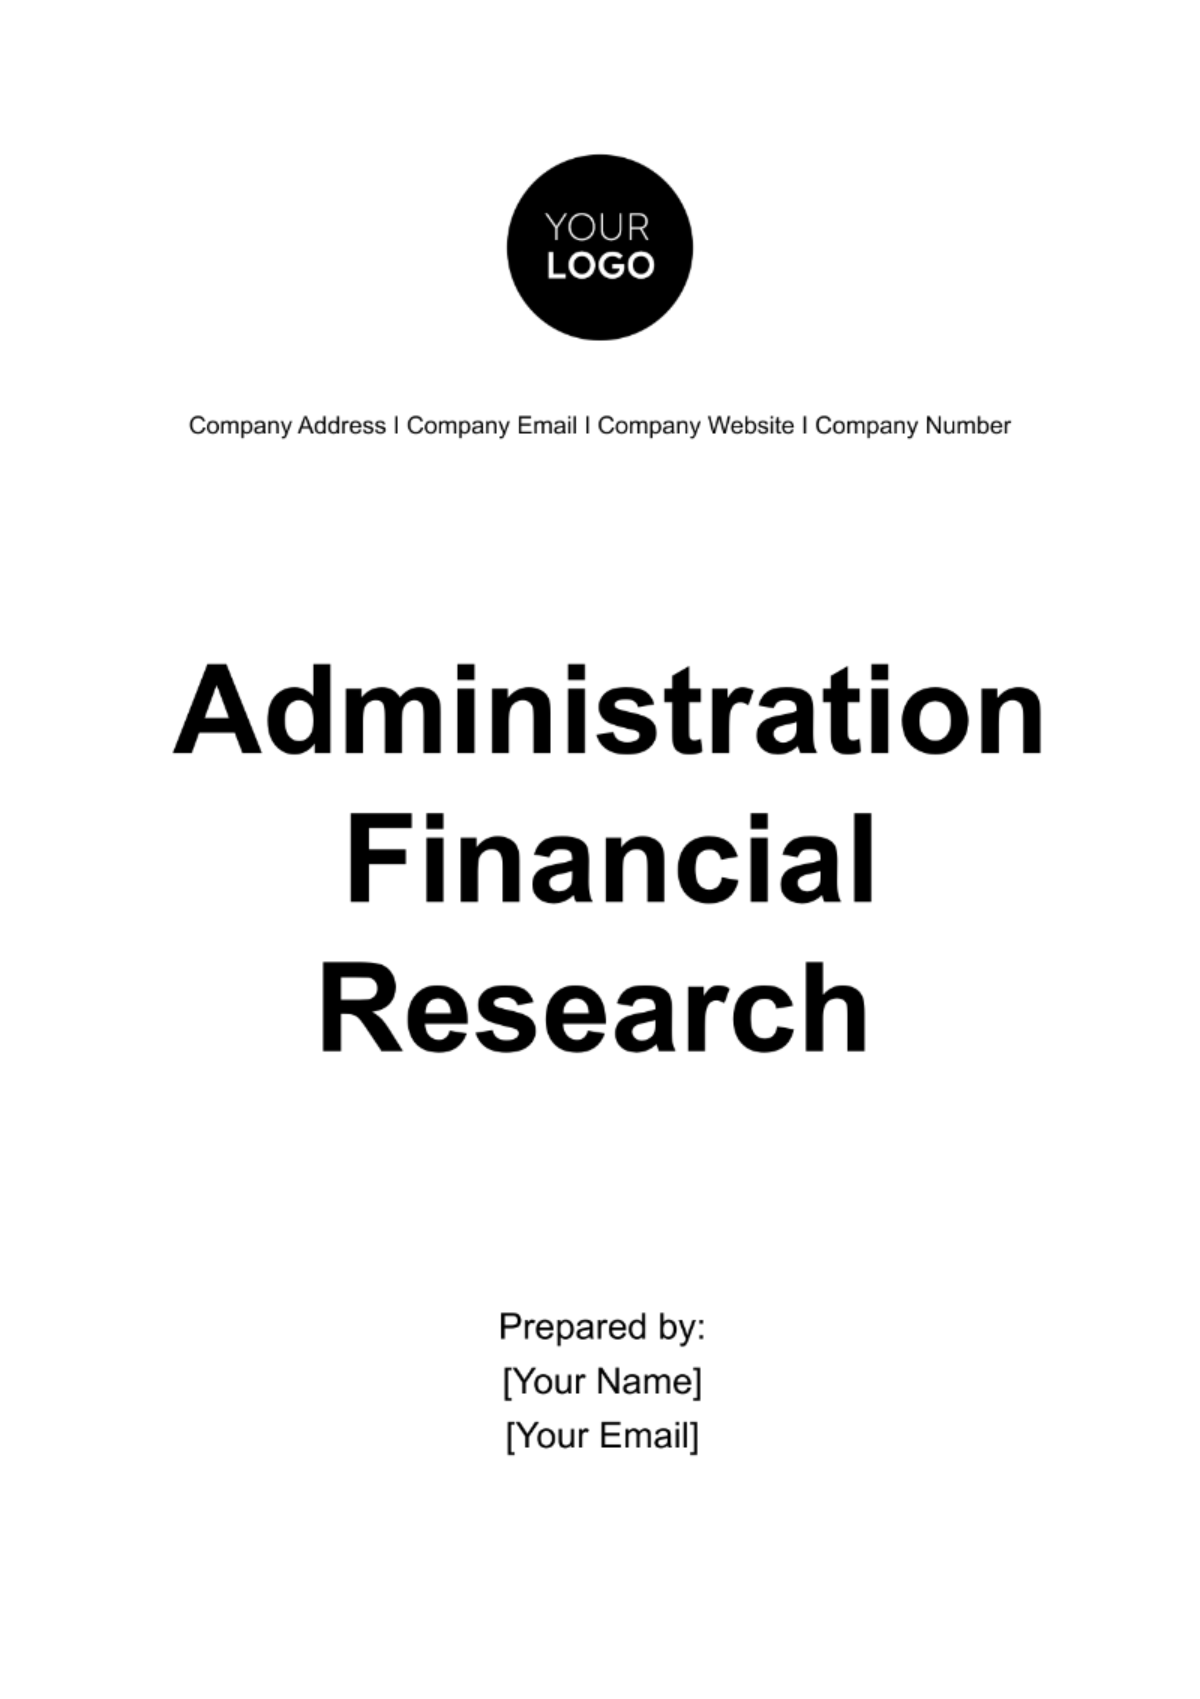 Administration Financial Research Template